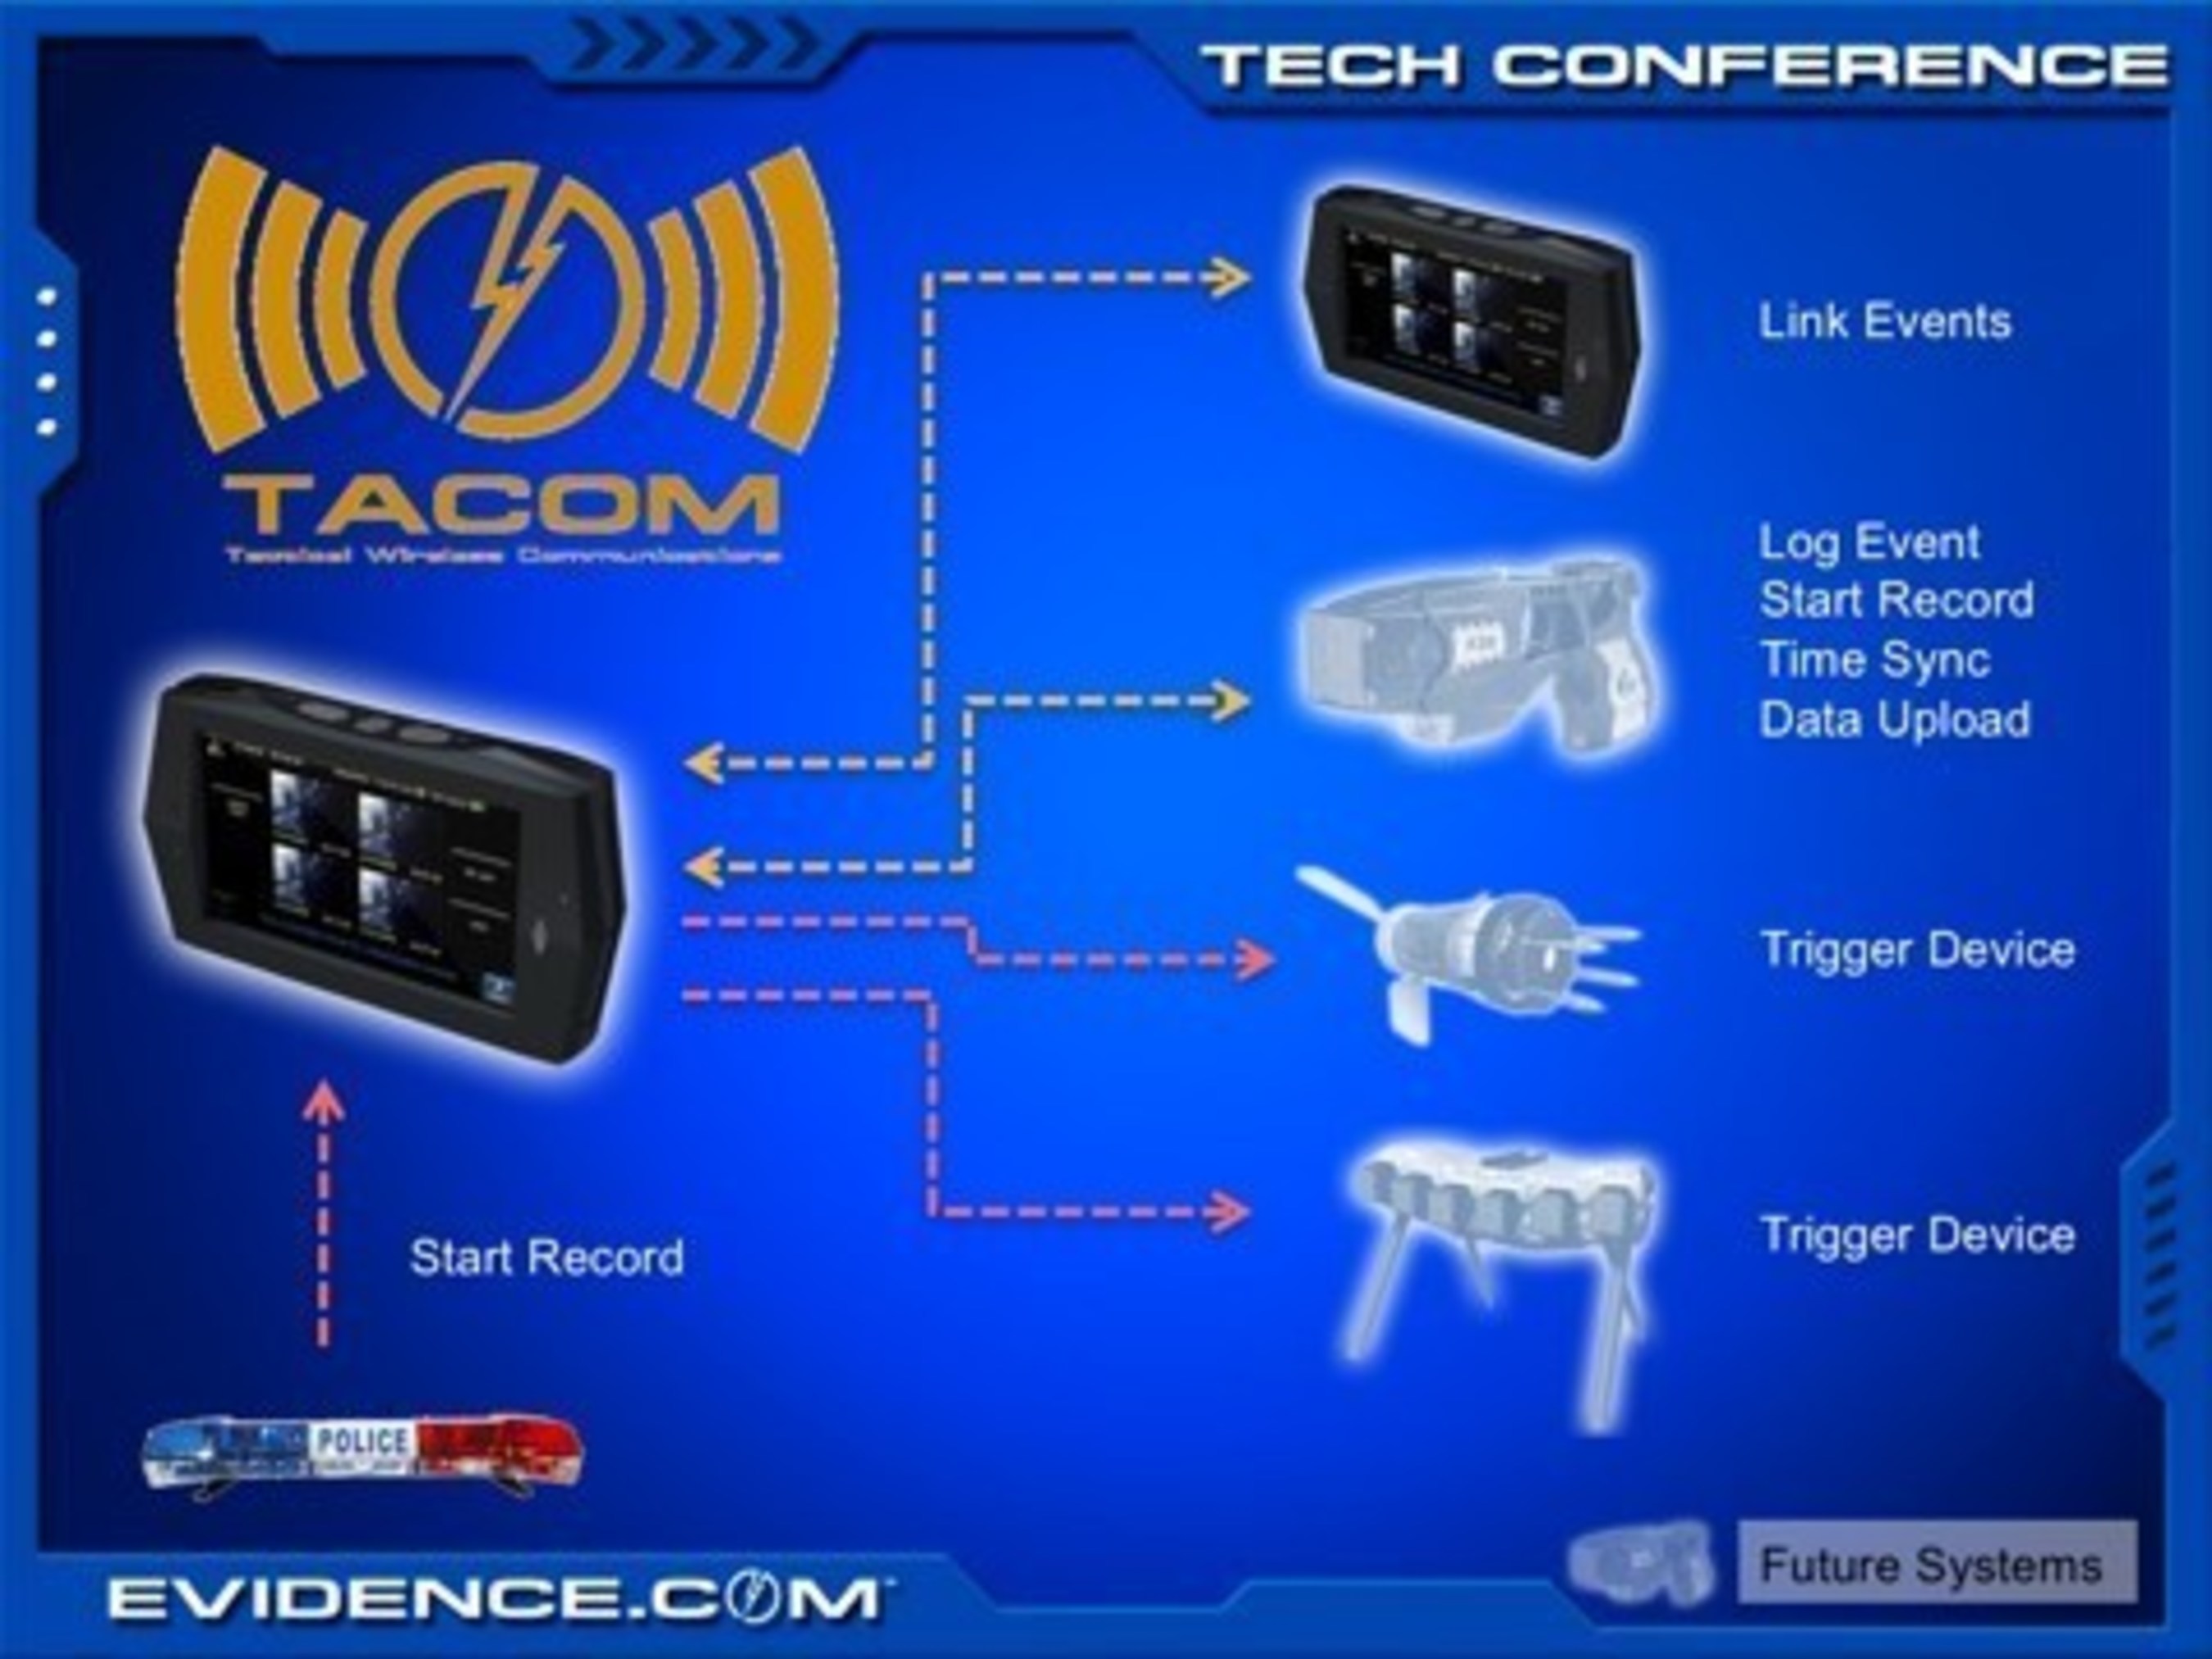 This PowerPoint slide was presented at TASER's April 28-29, 2009 Evidence.Com Technology Summit, and clearly shows TACOM architecture with wireless activation from both weapons and vehicle light bar.